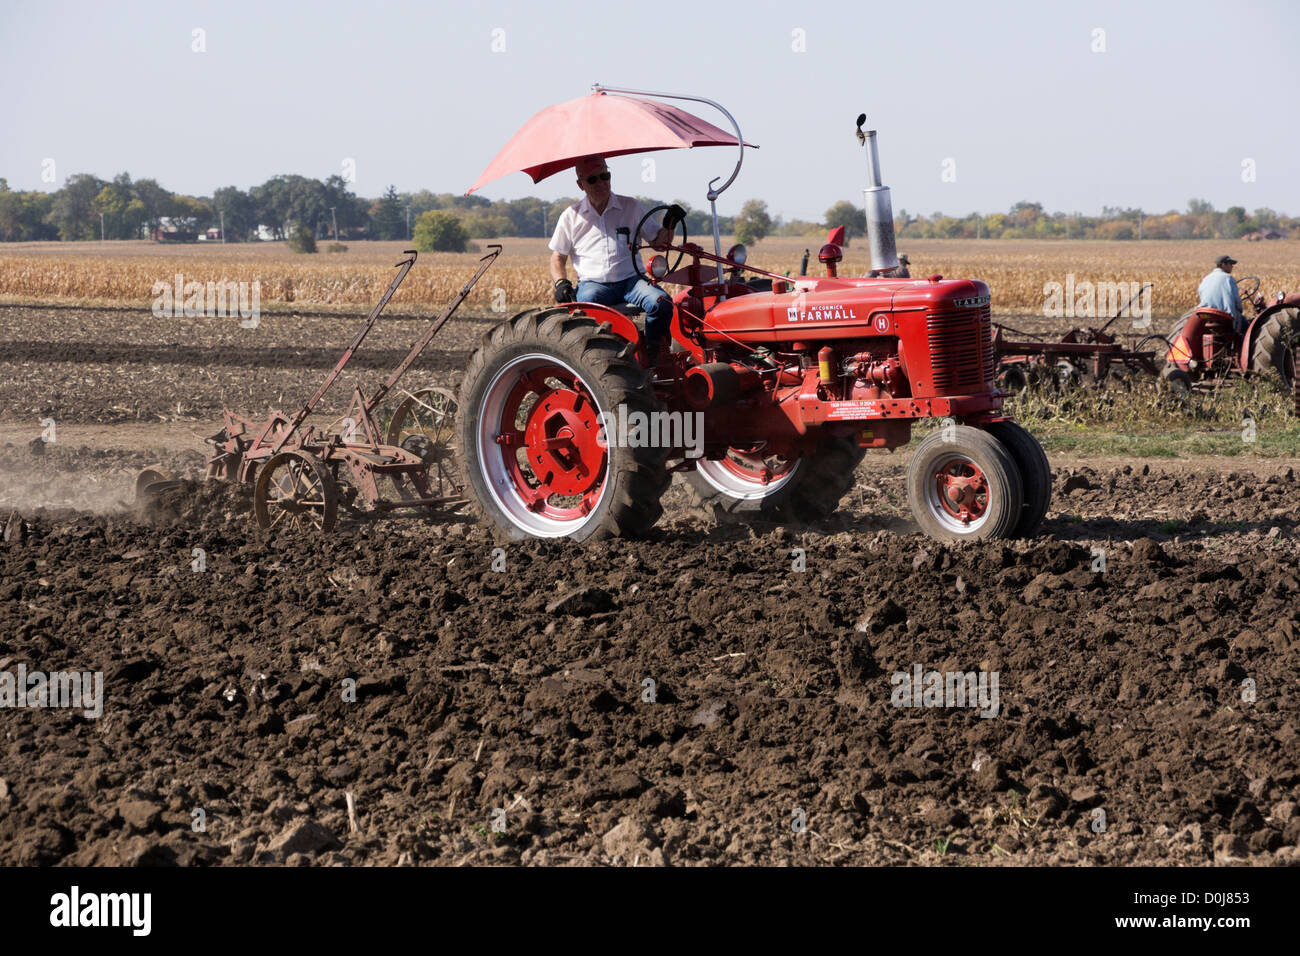 Farmall Model M plowing a field on a farm near Hebron, Illinois during an antique tractor plowing demonstration. Stock Photo